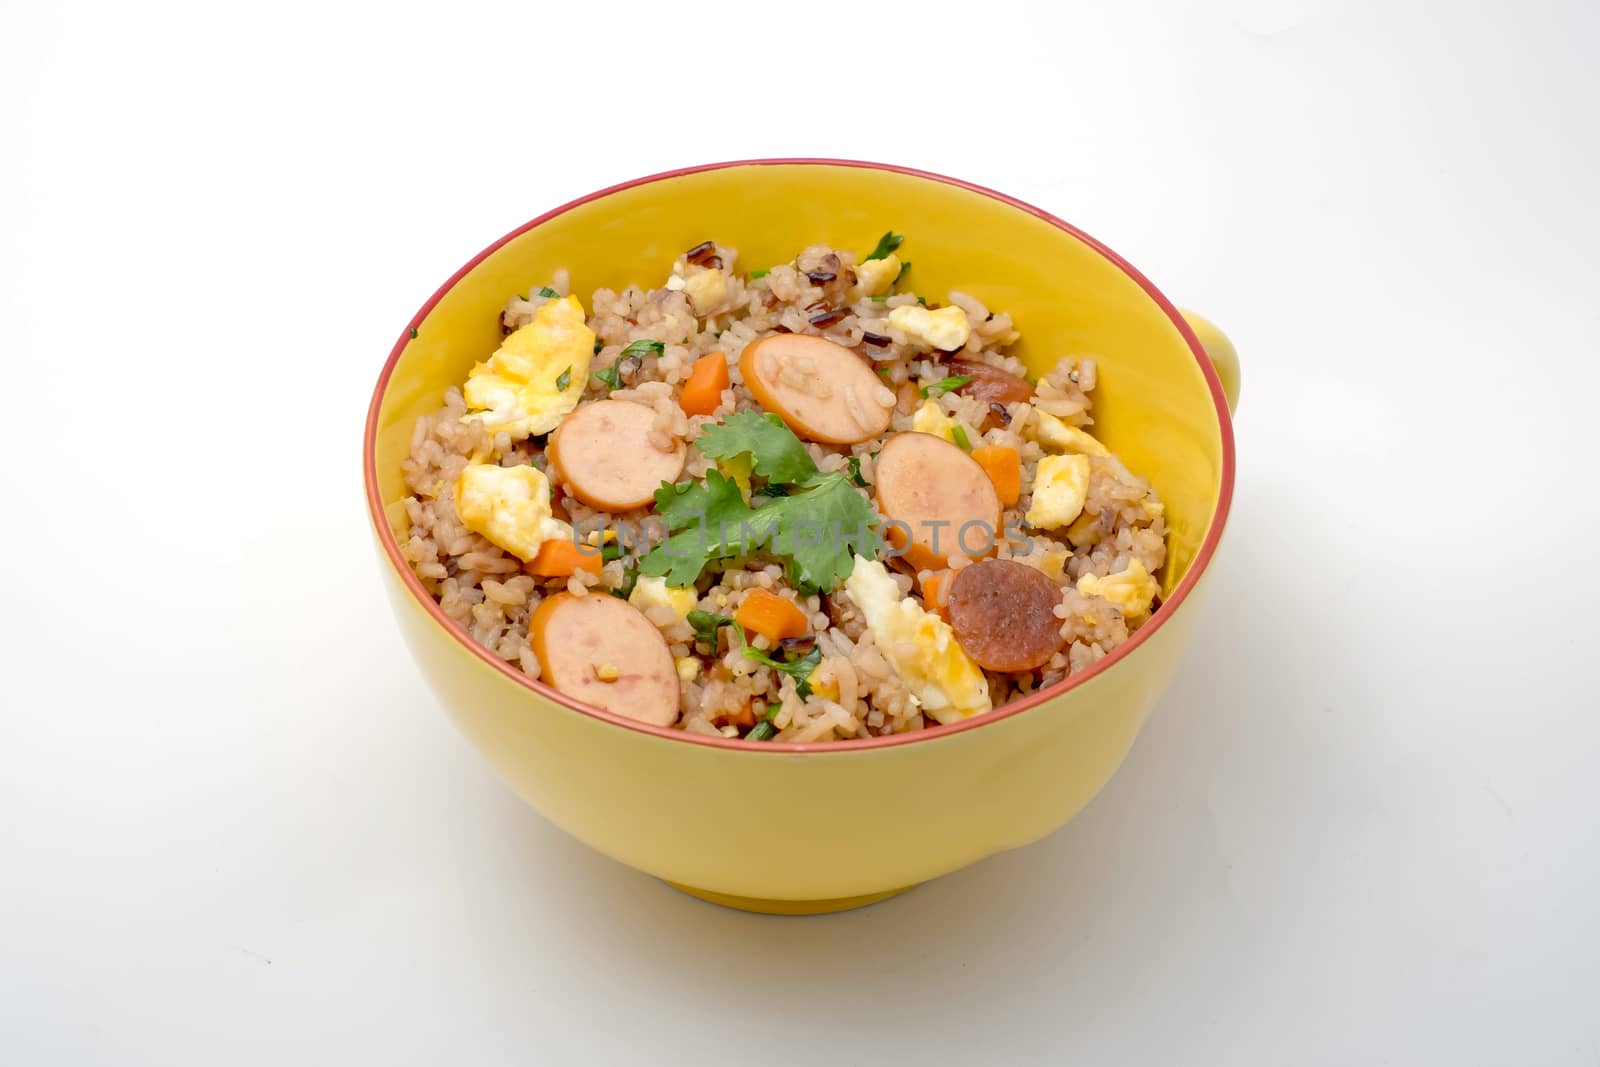 Fried rice with sausage and vegetables on white background by art9858